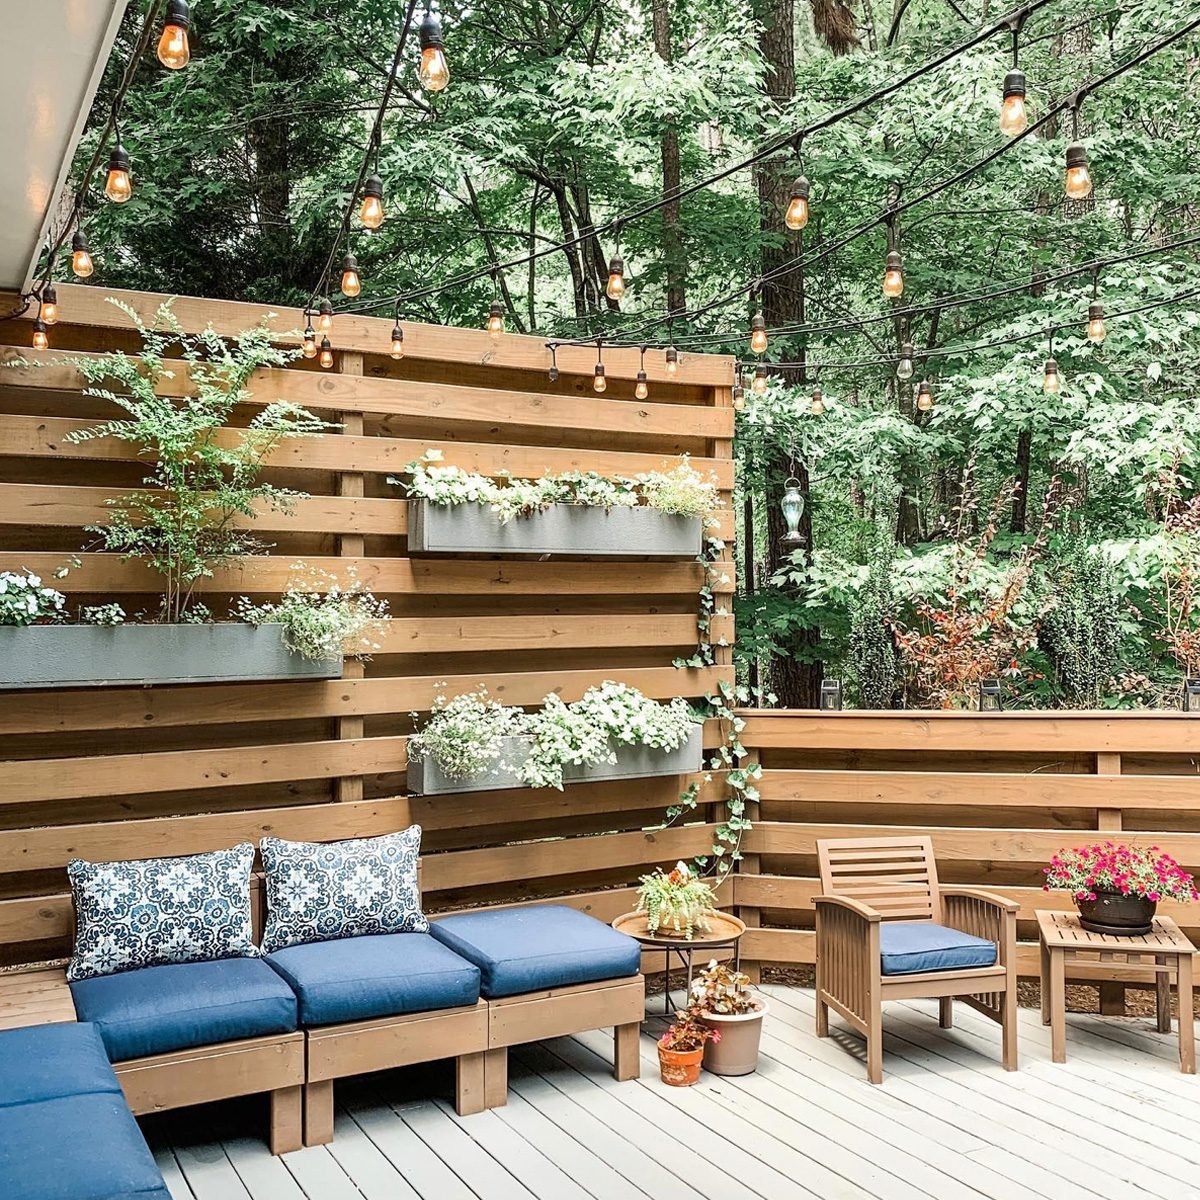 10 Privacy Fence Ideas for Your Backyard